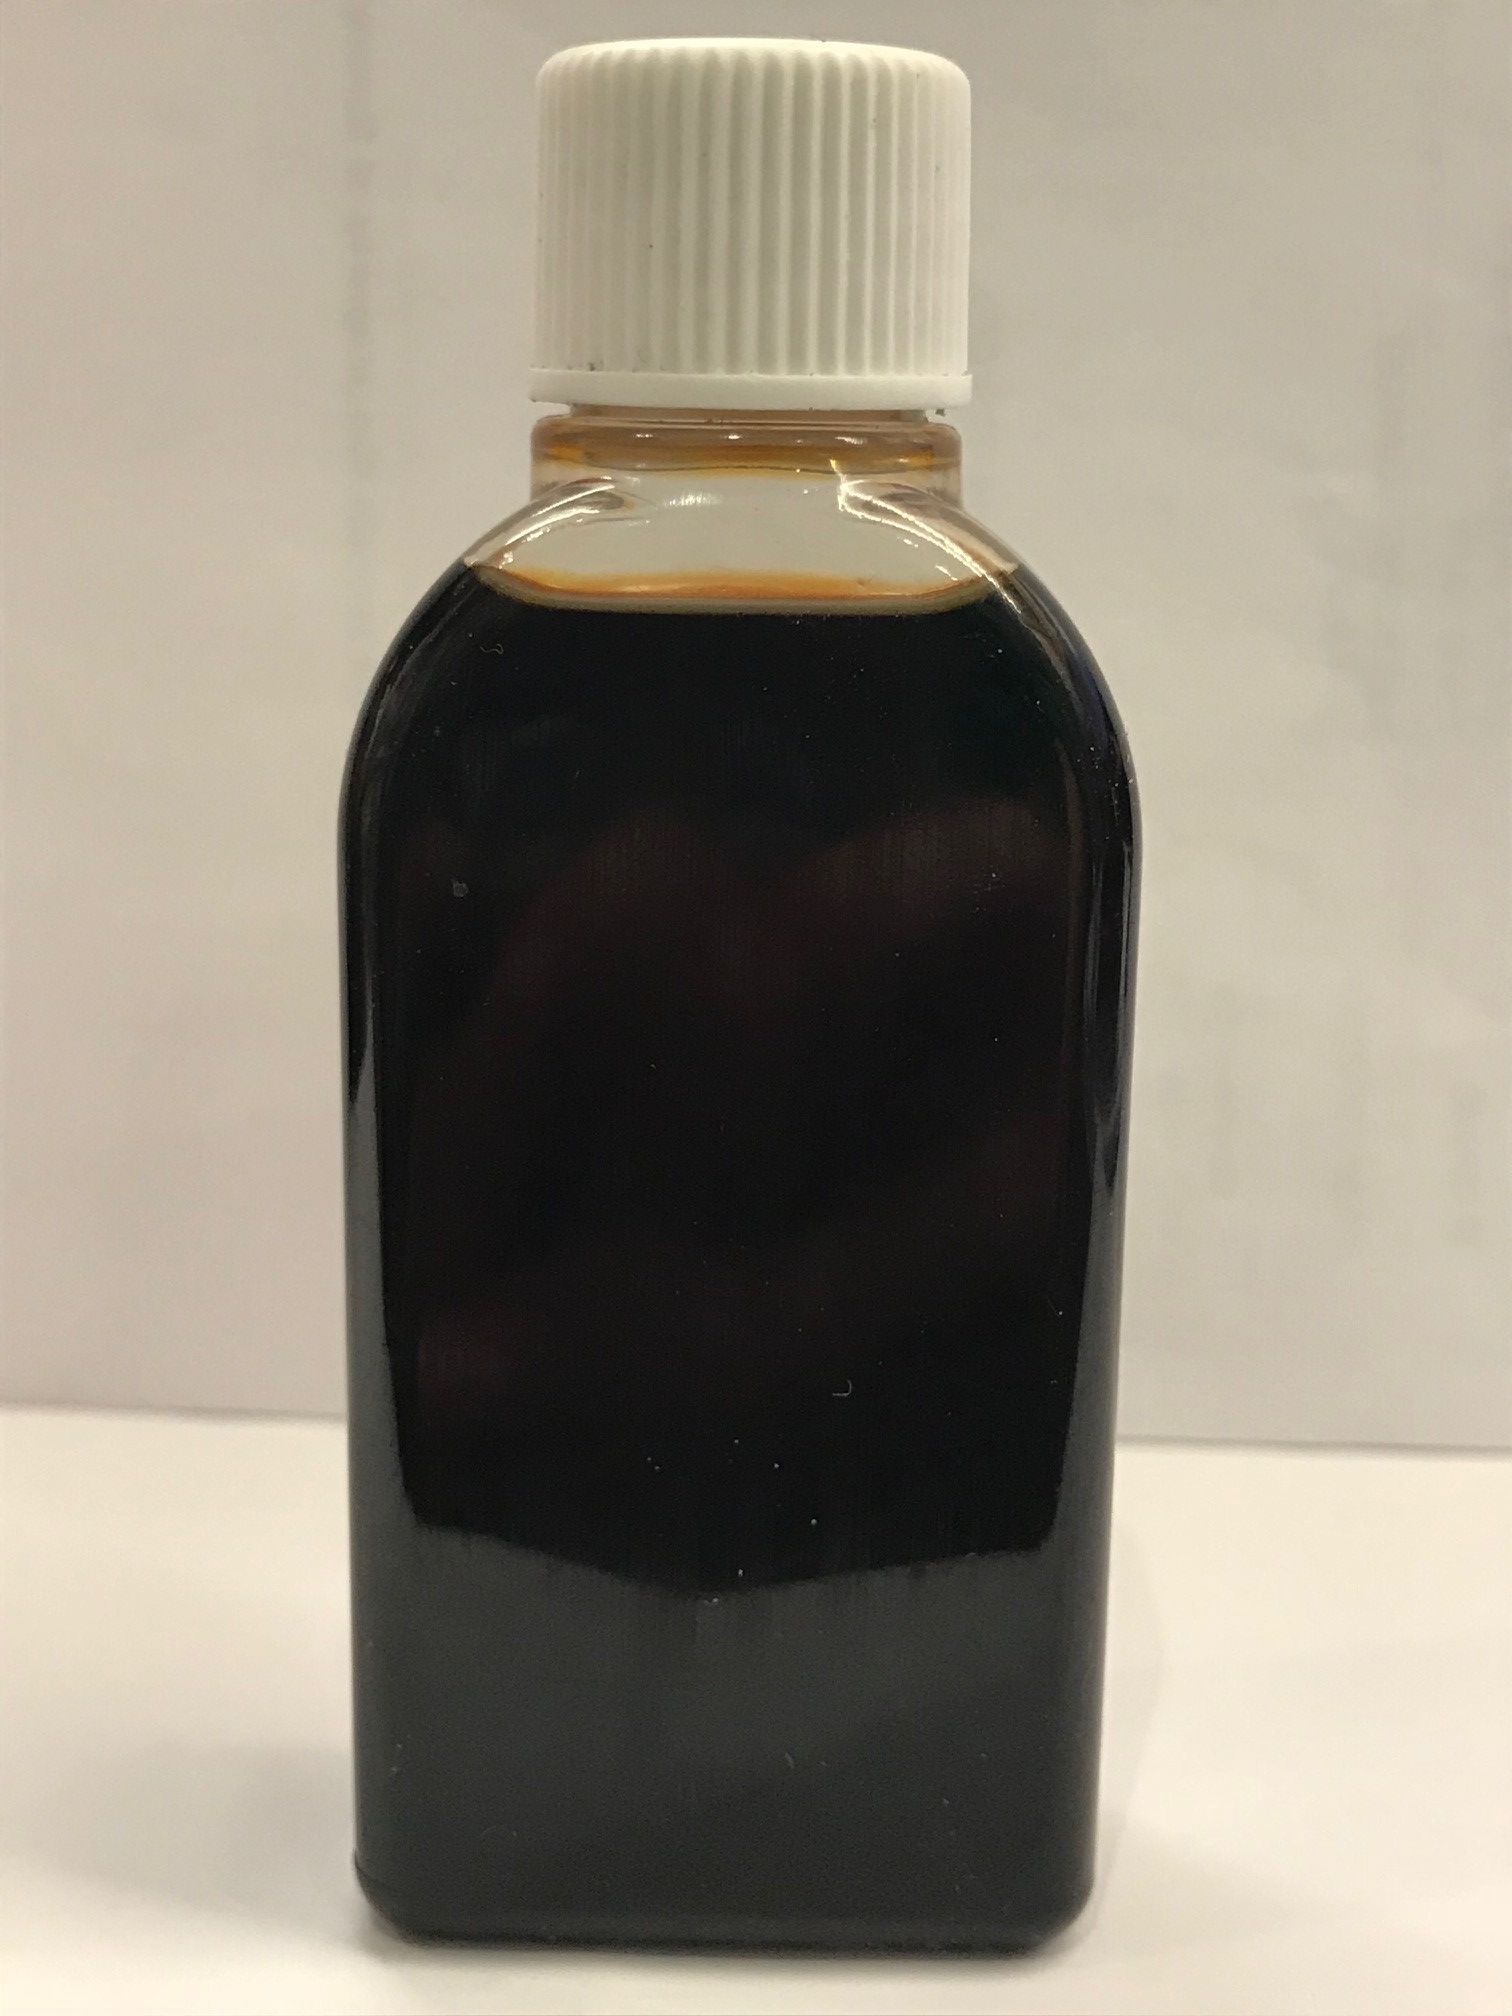 Highly Concentrated Alder Smoke Liquid - 100ml - produces 100L of brine